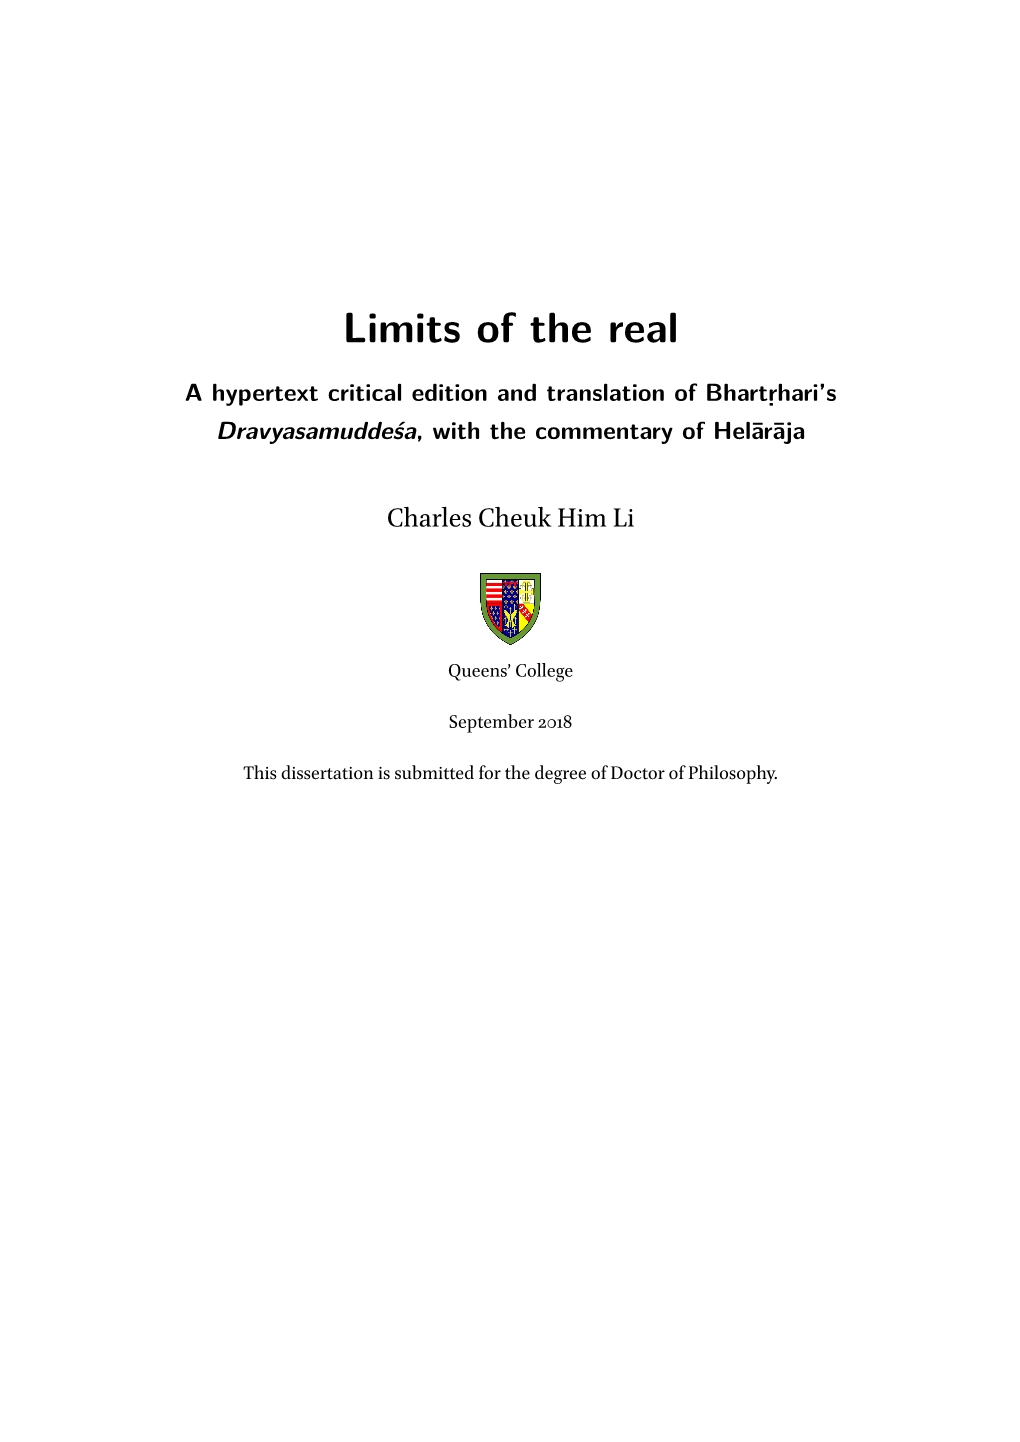 Limits of the Real